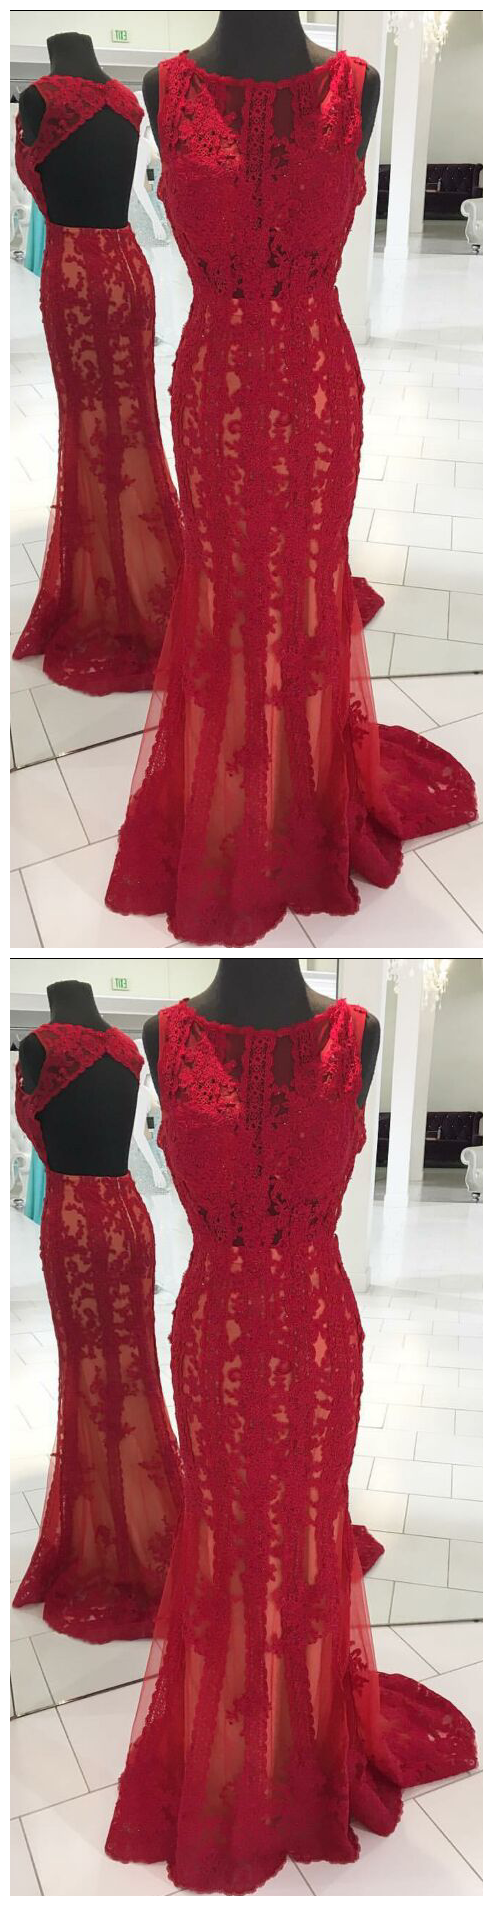 Red Sweetheart Sheath Slit Prom Dress,sheer Back Evening Gown With Lace Appliques Prom Dresses